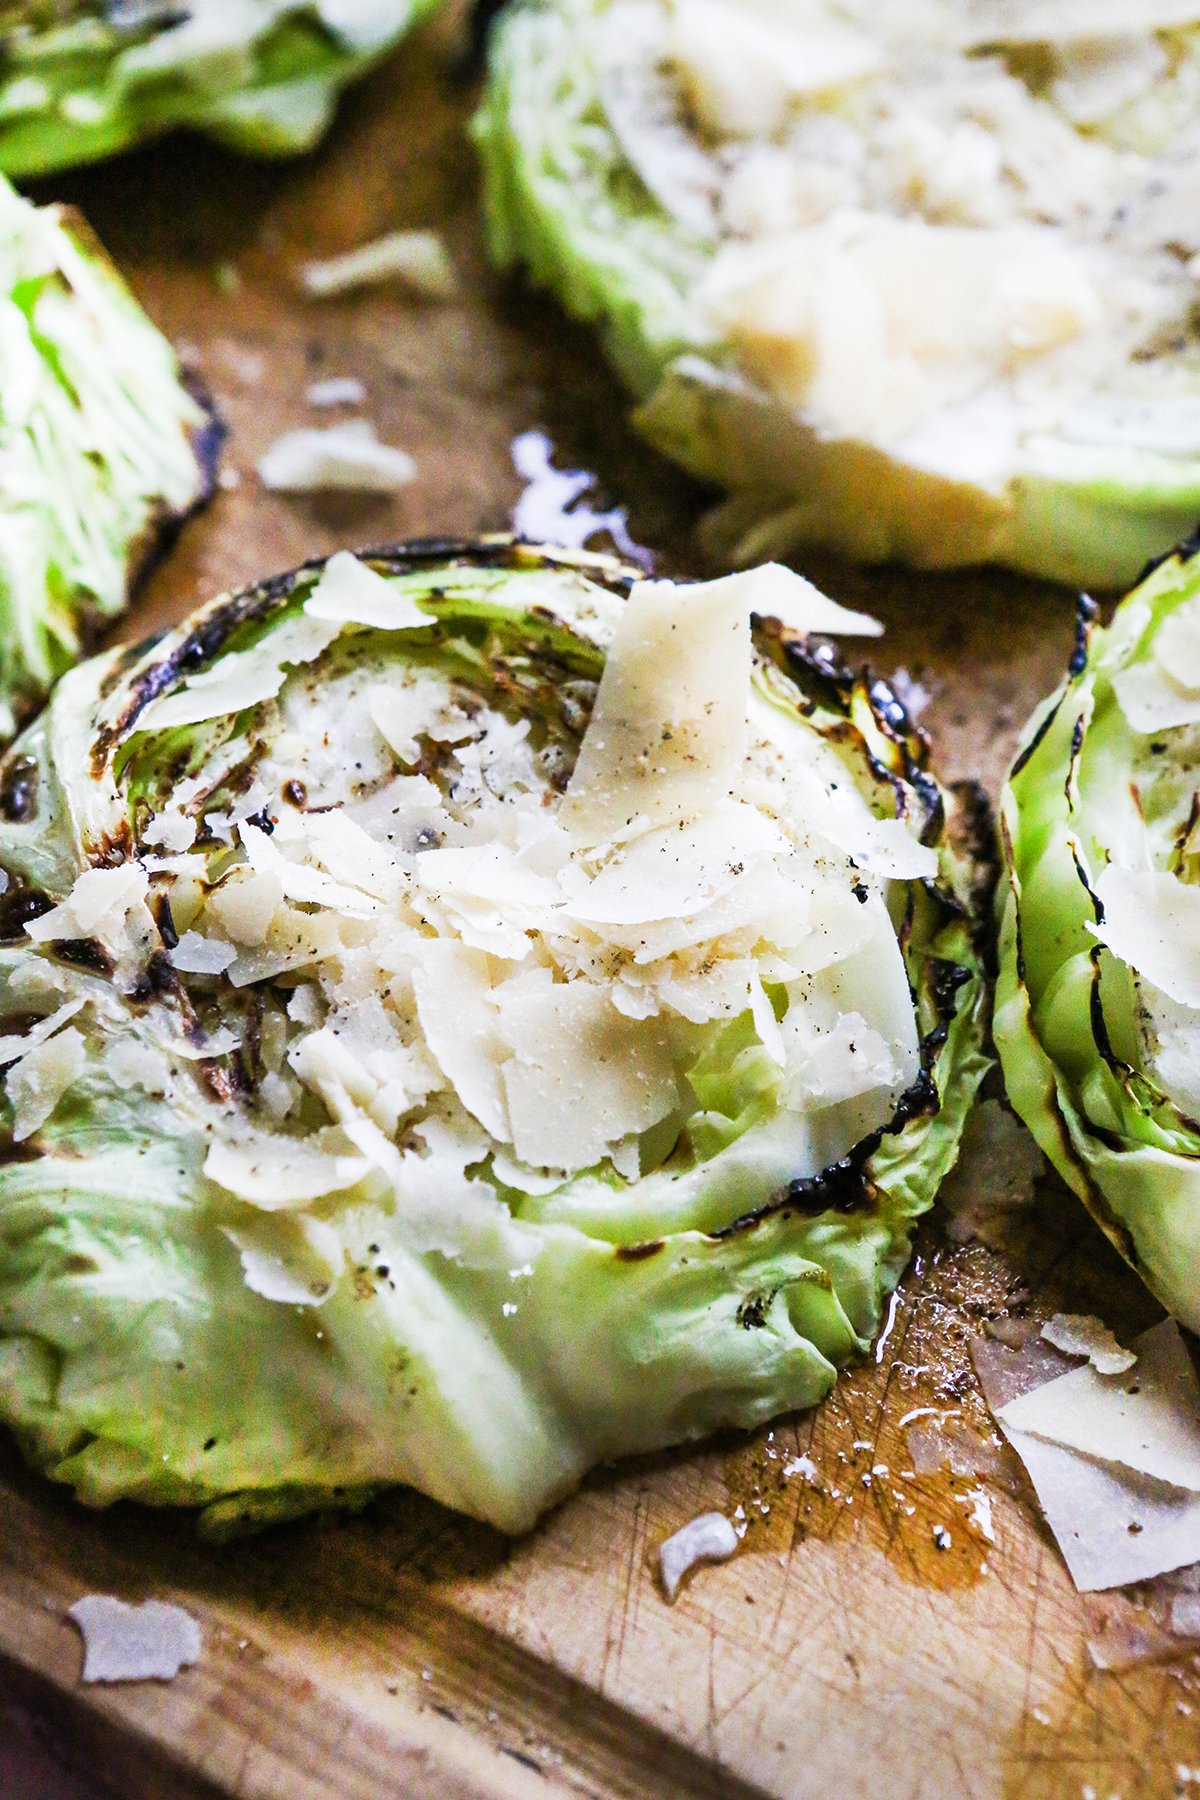 Grilled cabbage steaks on a cutting board, topped with shaved parmesan cheese and pepper.